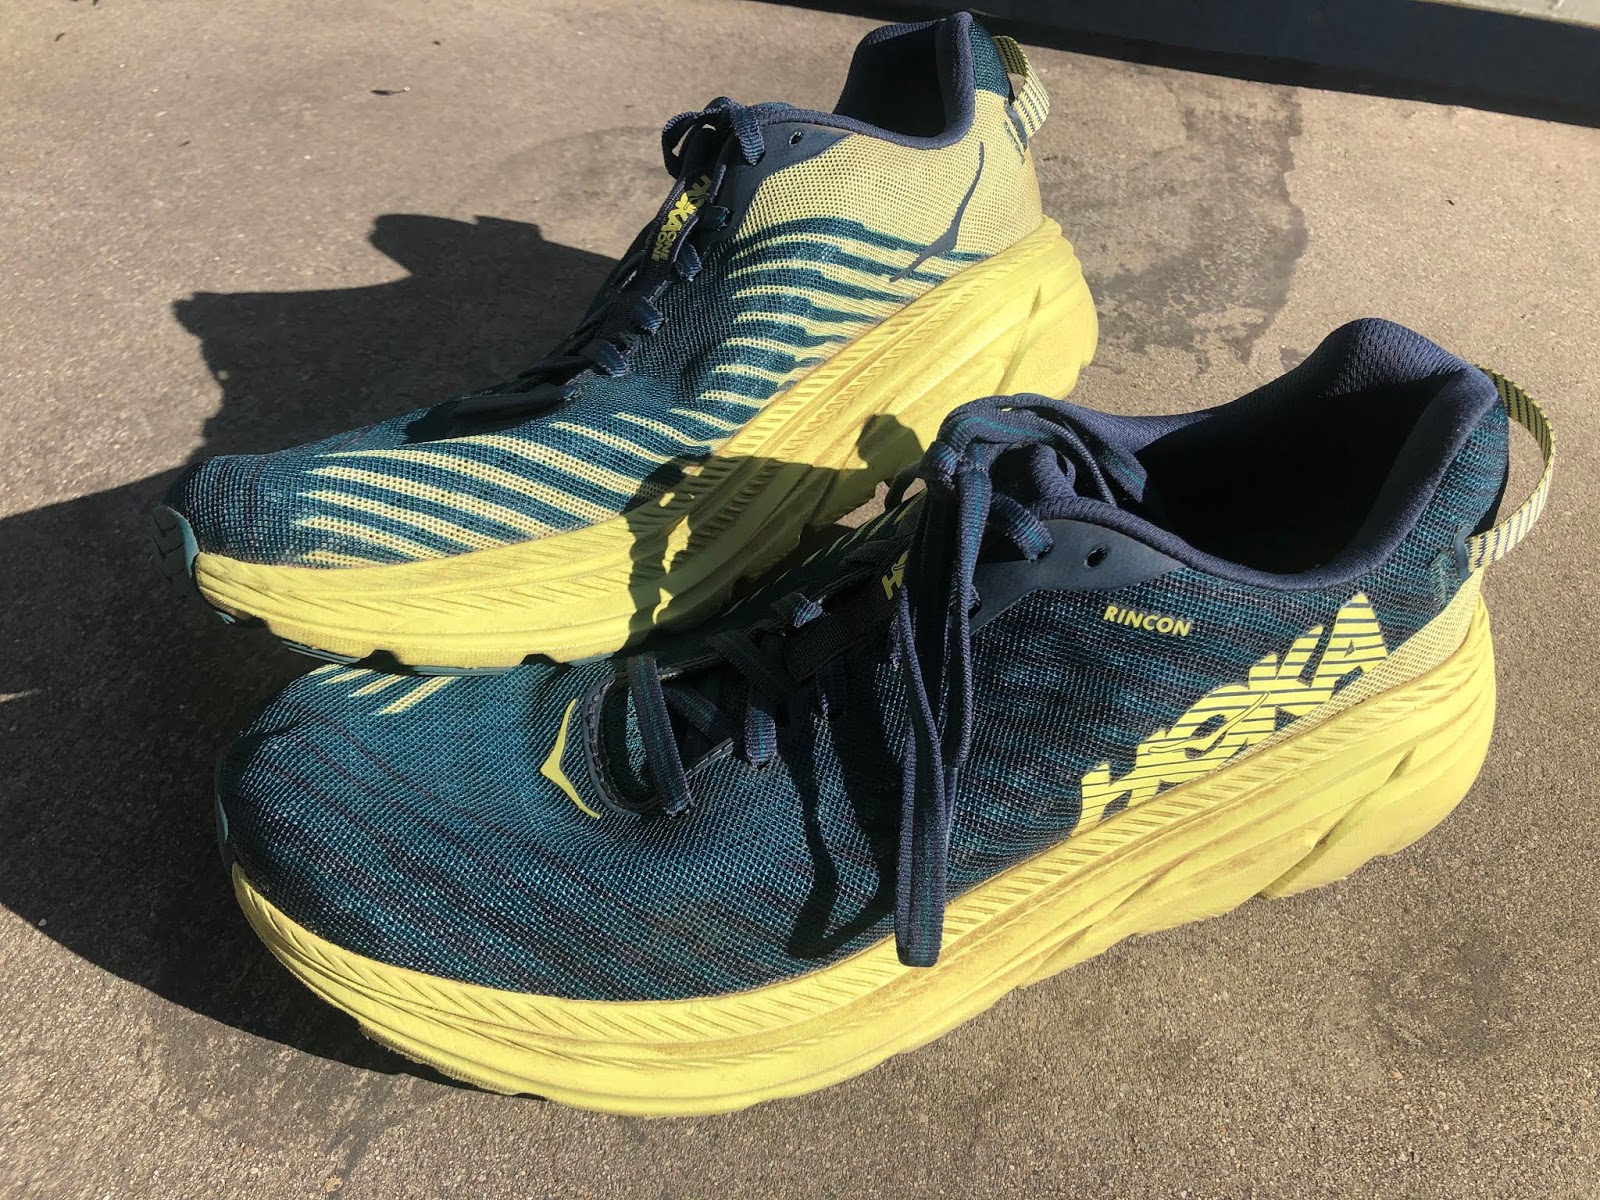 HOKA ONE ONE Rincon Review - DOCTORS OF RUNNING